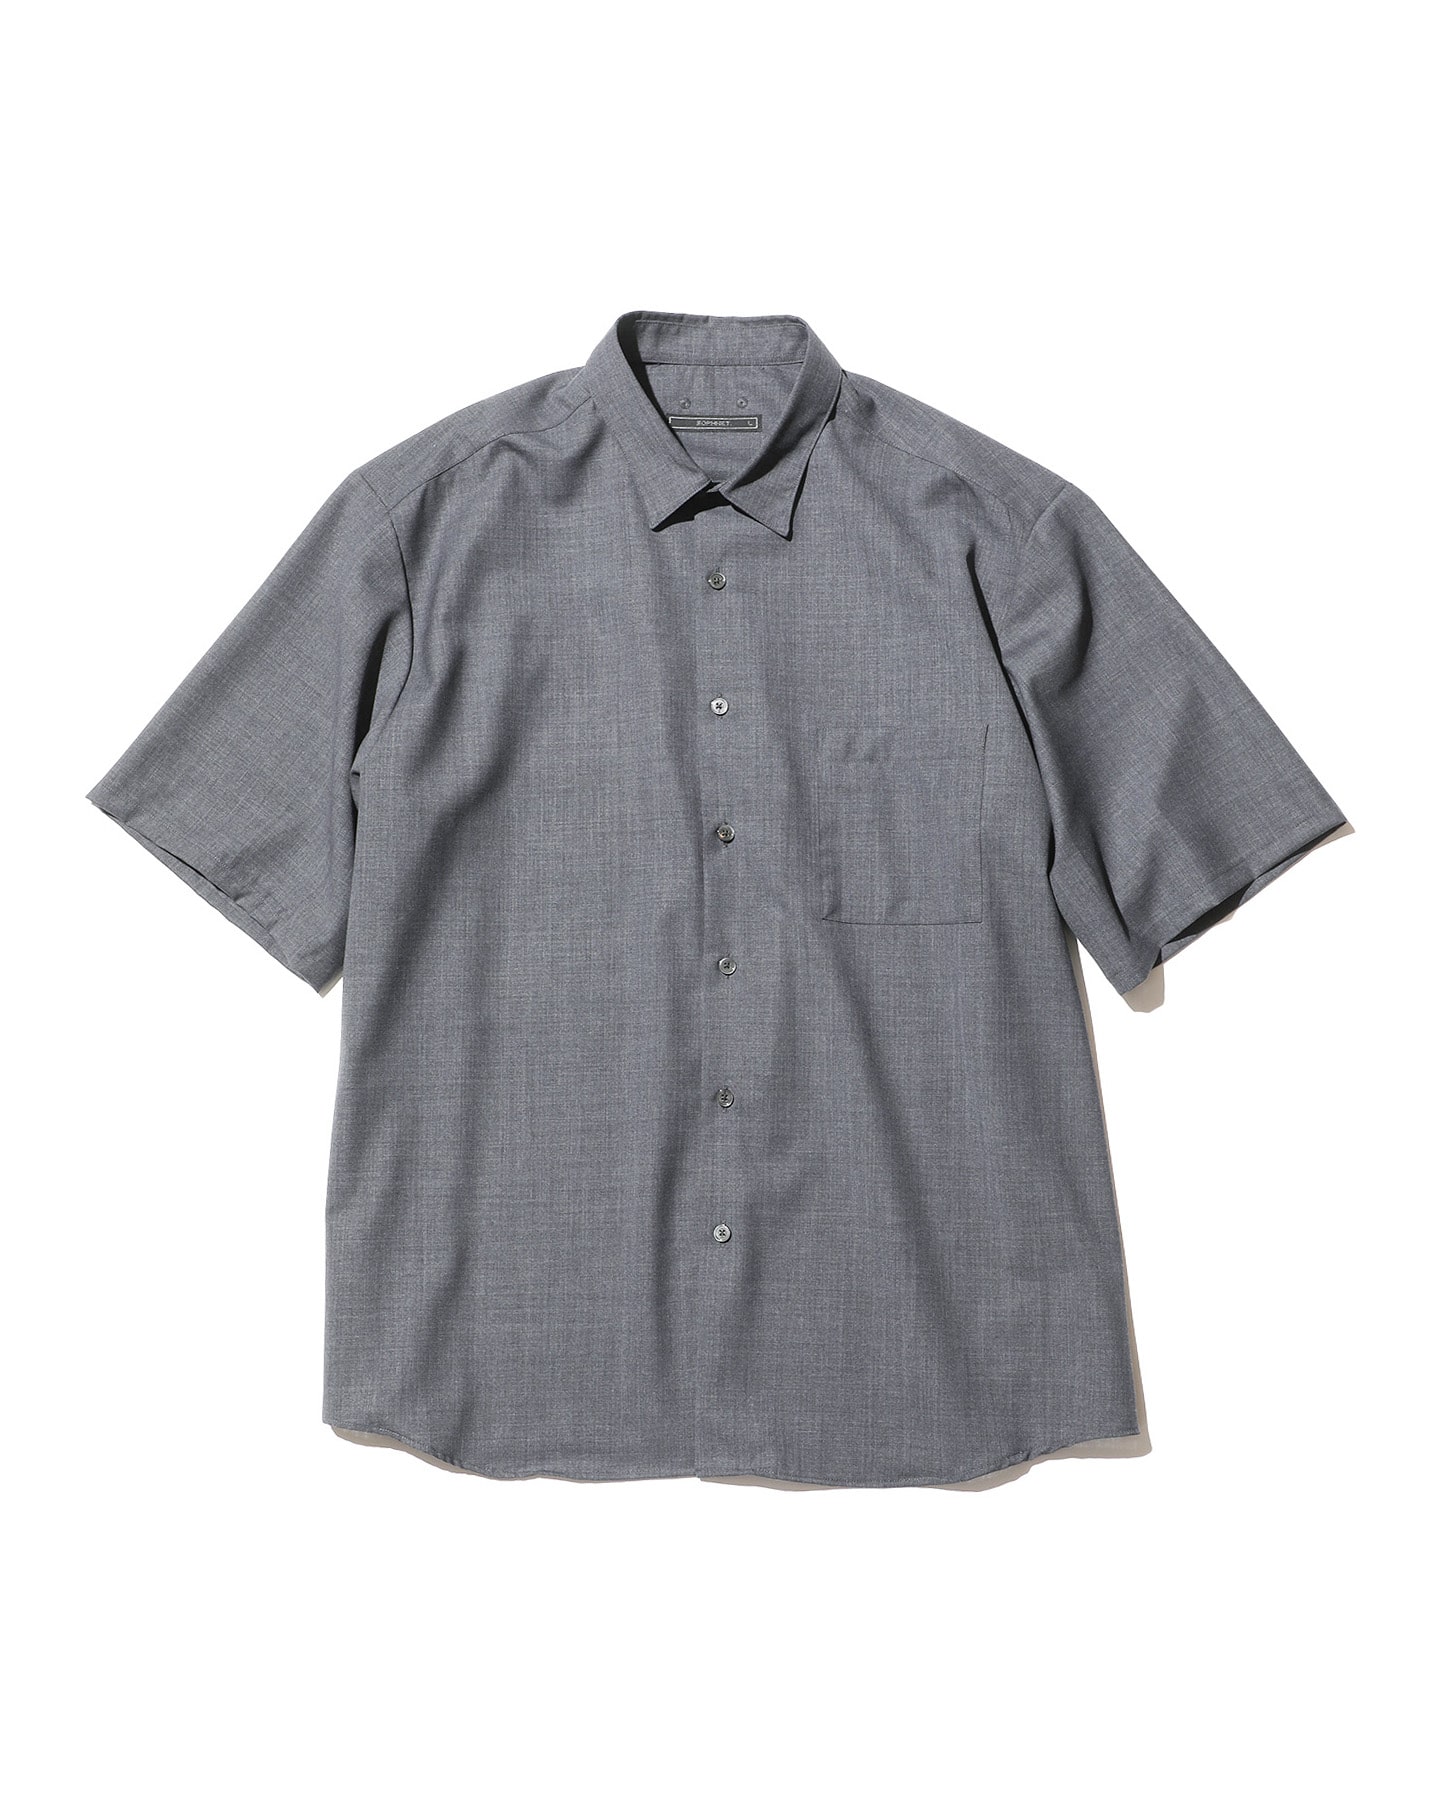 SOPH. | SUMMER STRETCH WOOL S/S BAGGY SHIRT(L CHARCOAL GRAY):